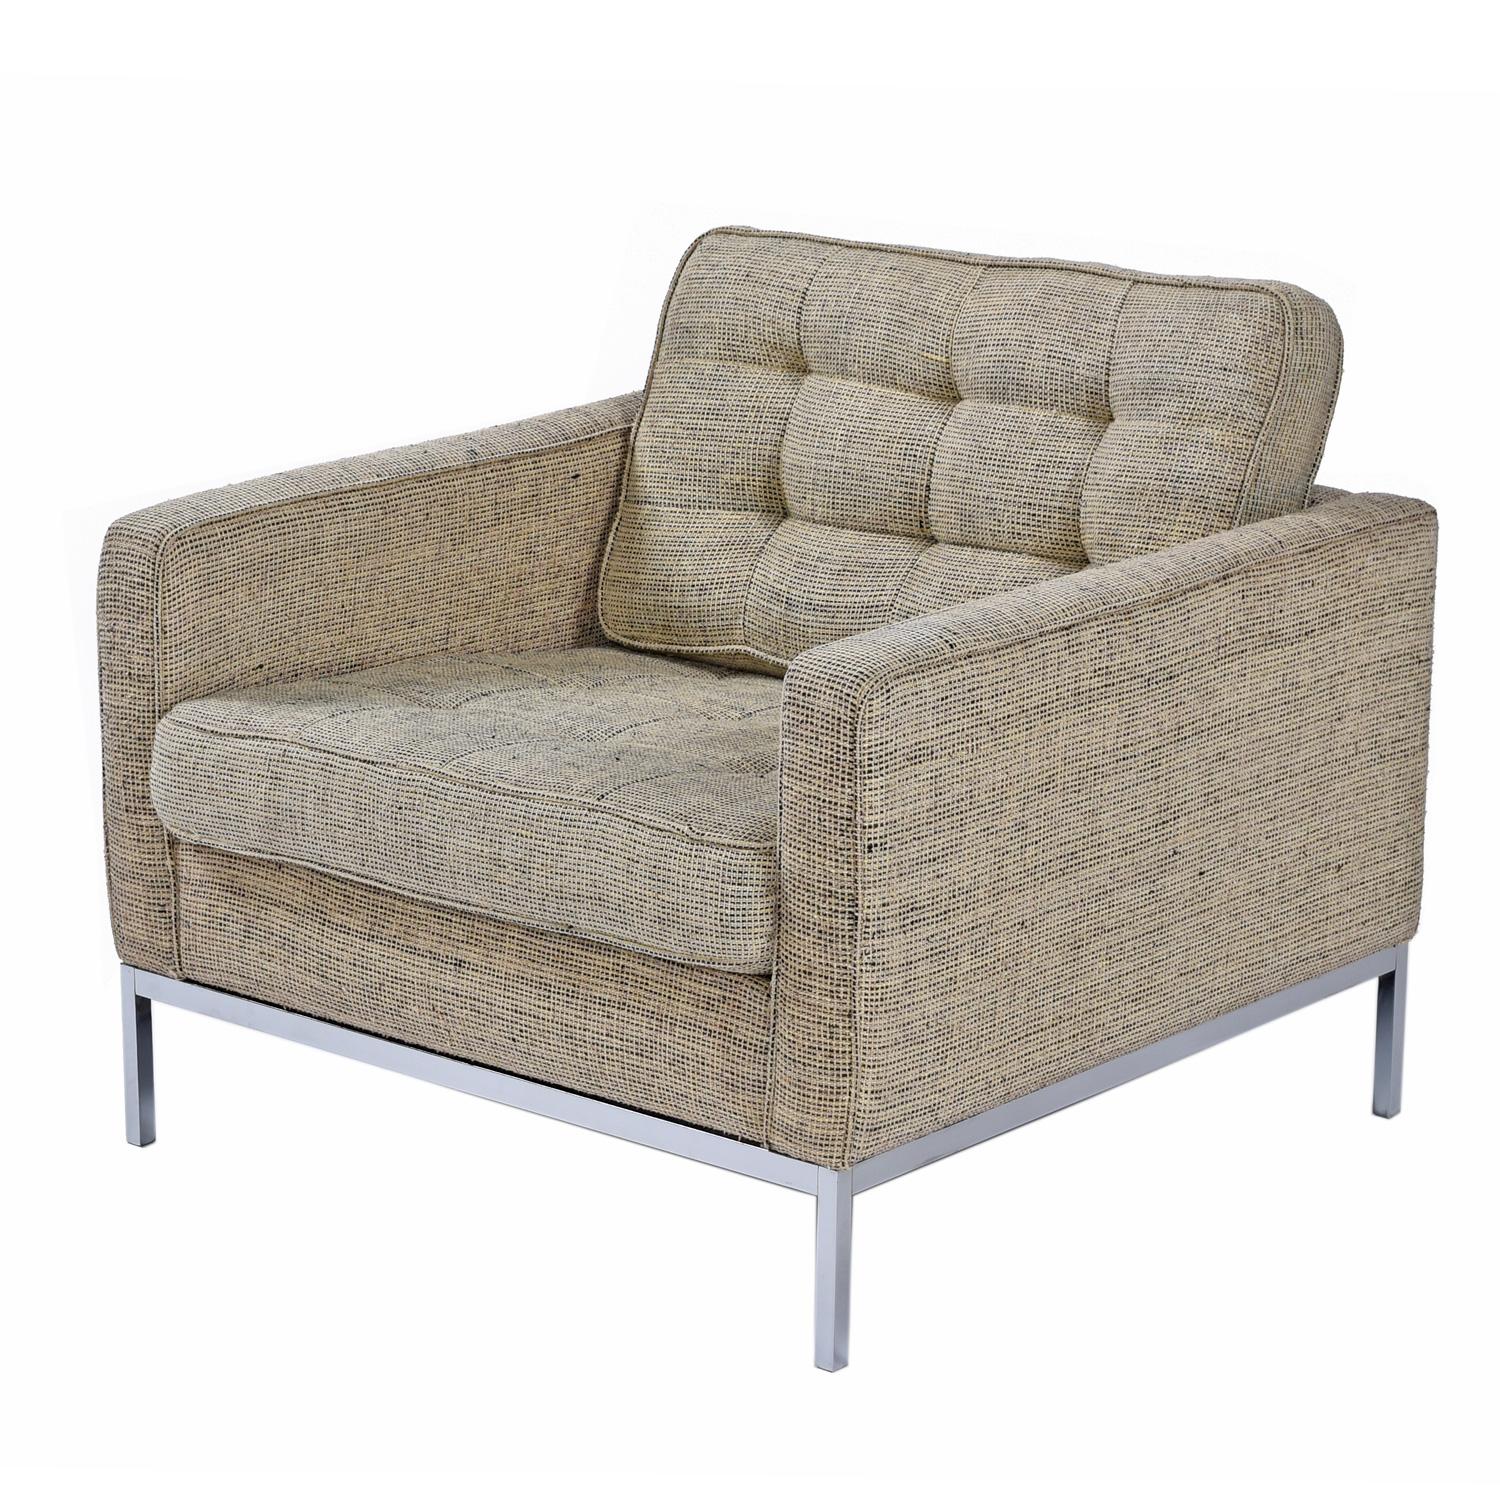 Late 20th Century Florence Knoll Sofa & Chair Set on Steel Bases in Heather Grey Tweed Fabric